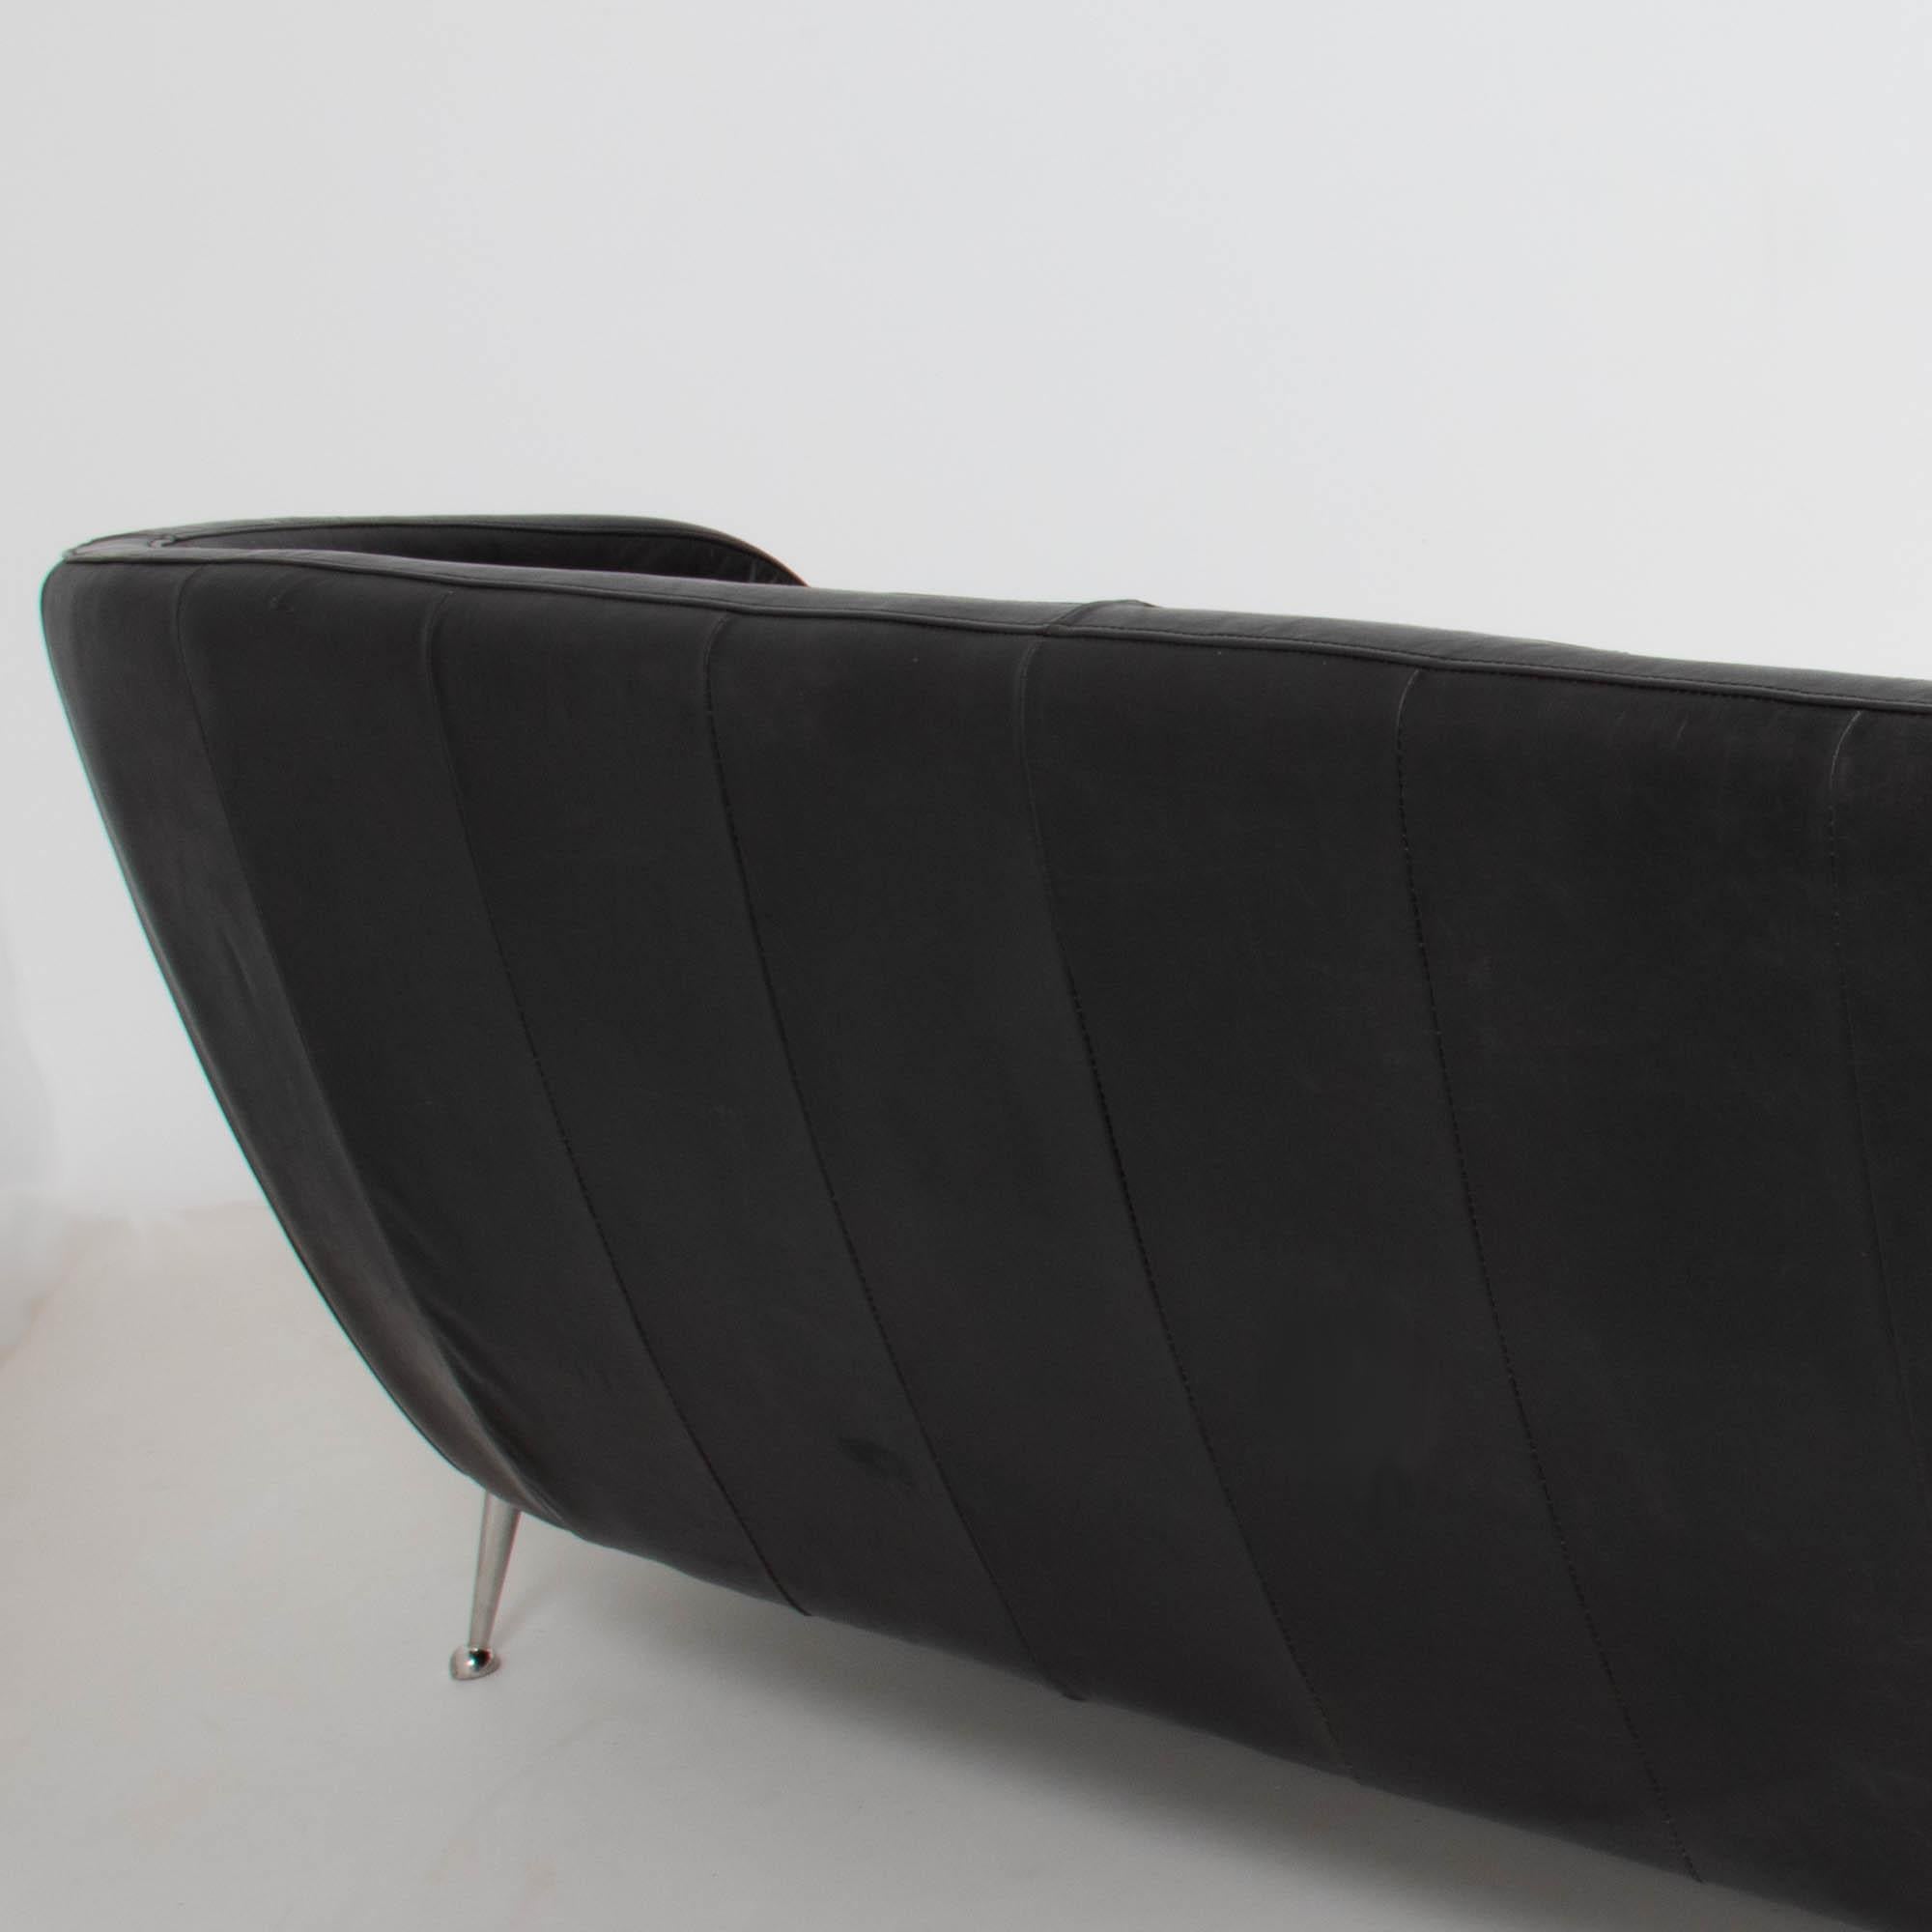 Vintage Italian Curved Black Three Seater Leather Sofa, 1960s For Sale 2